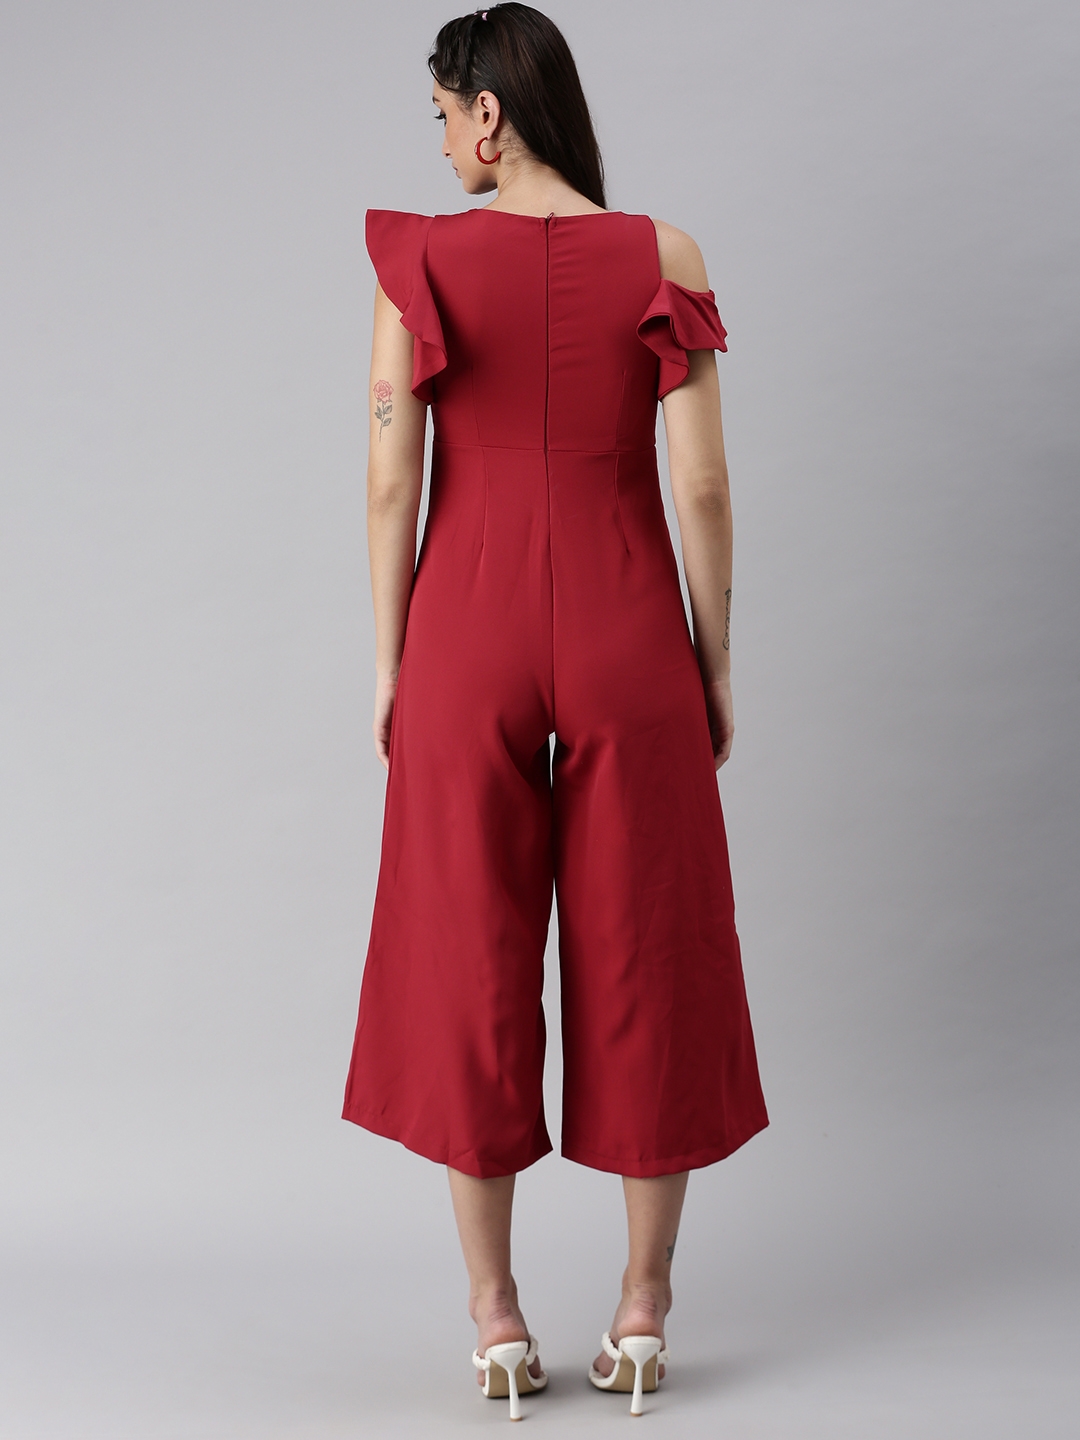 Women's Red Polyester Solid Dresses